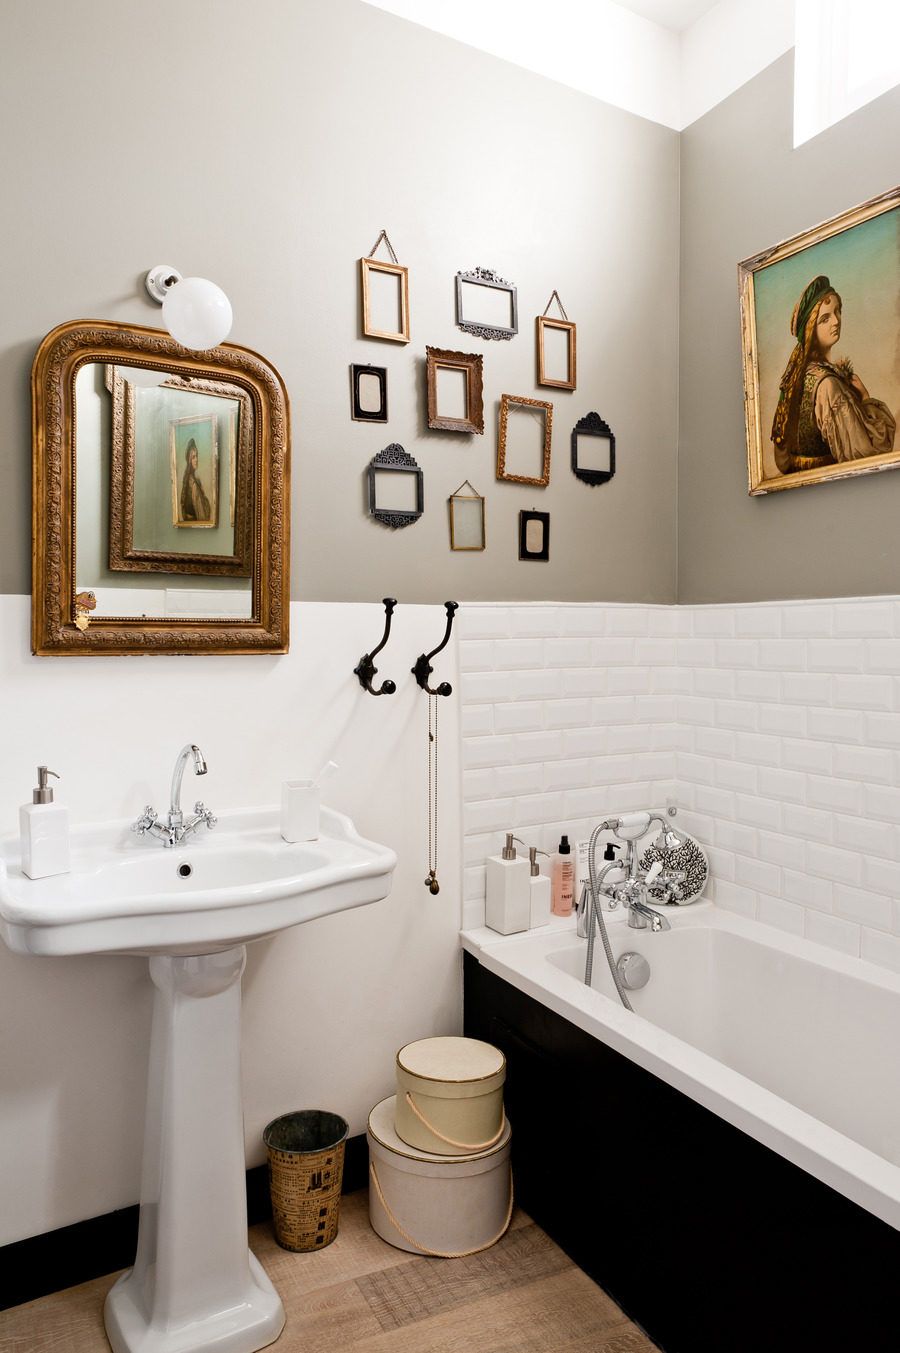 French Country Bathroom with Vintage Gold Frames on wall via SMP Julien Fernandez